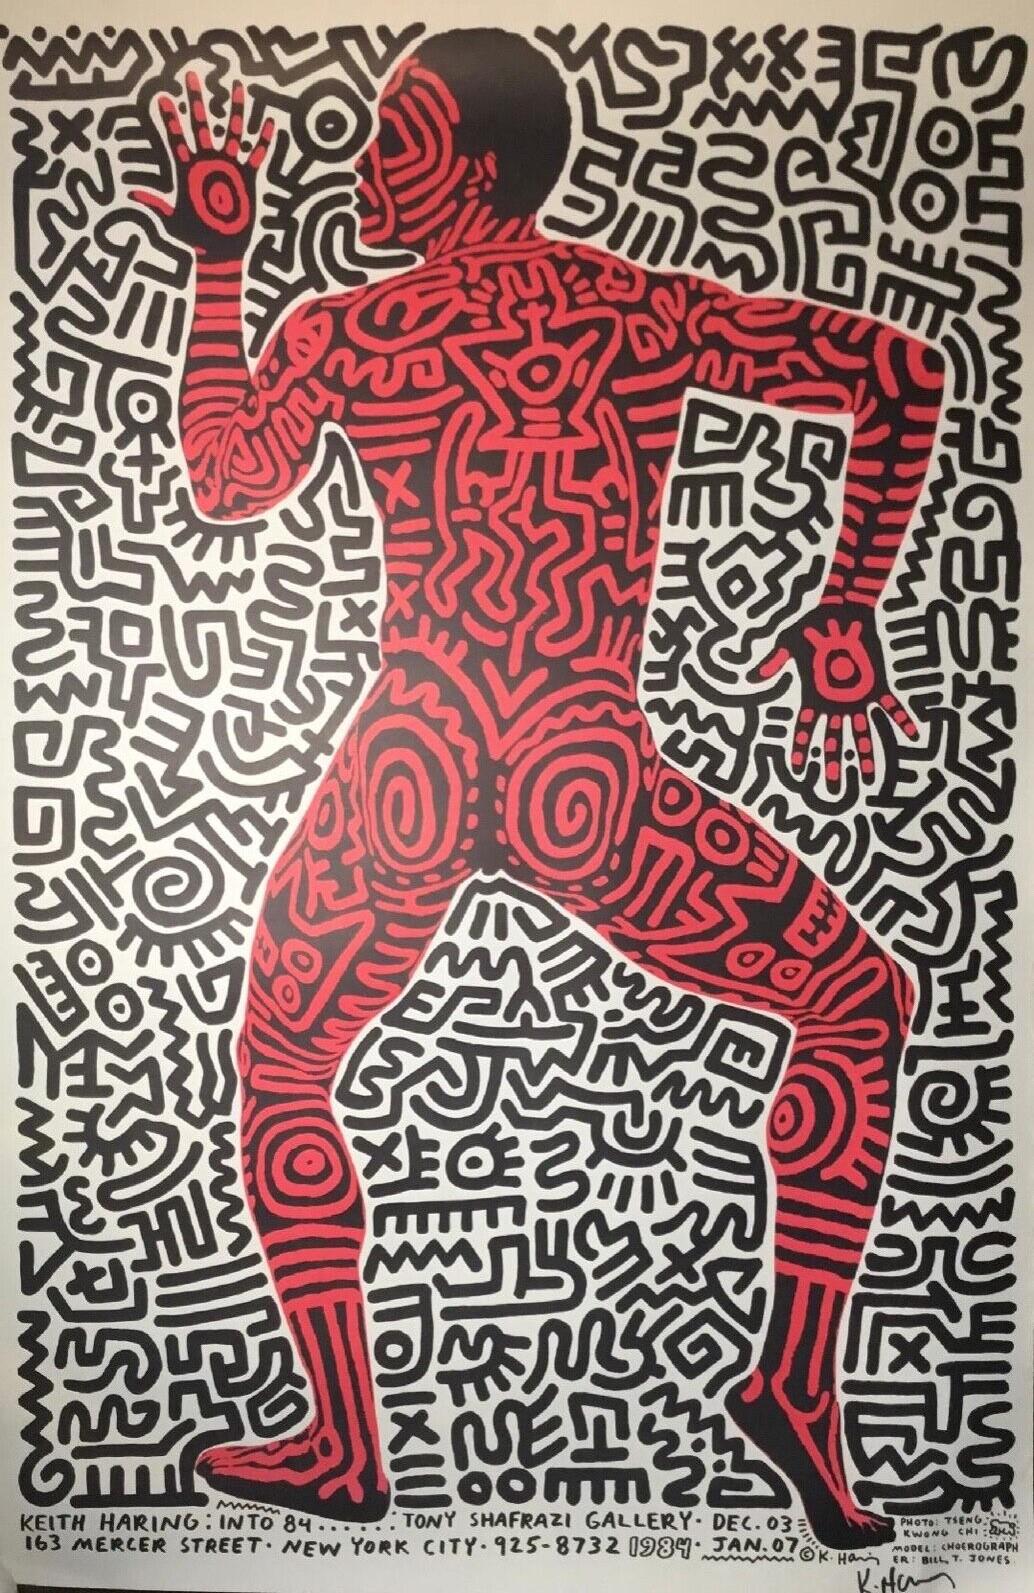 A fantastic, wonderfully designed, striking original color offset lithograph on thick wove paper exhibition poster from Keith Haring's 1983 Tony Shafrazi New York City Gallery show Into 84.  The work depicts choreographer and dancer Bill T. Jones'